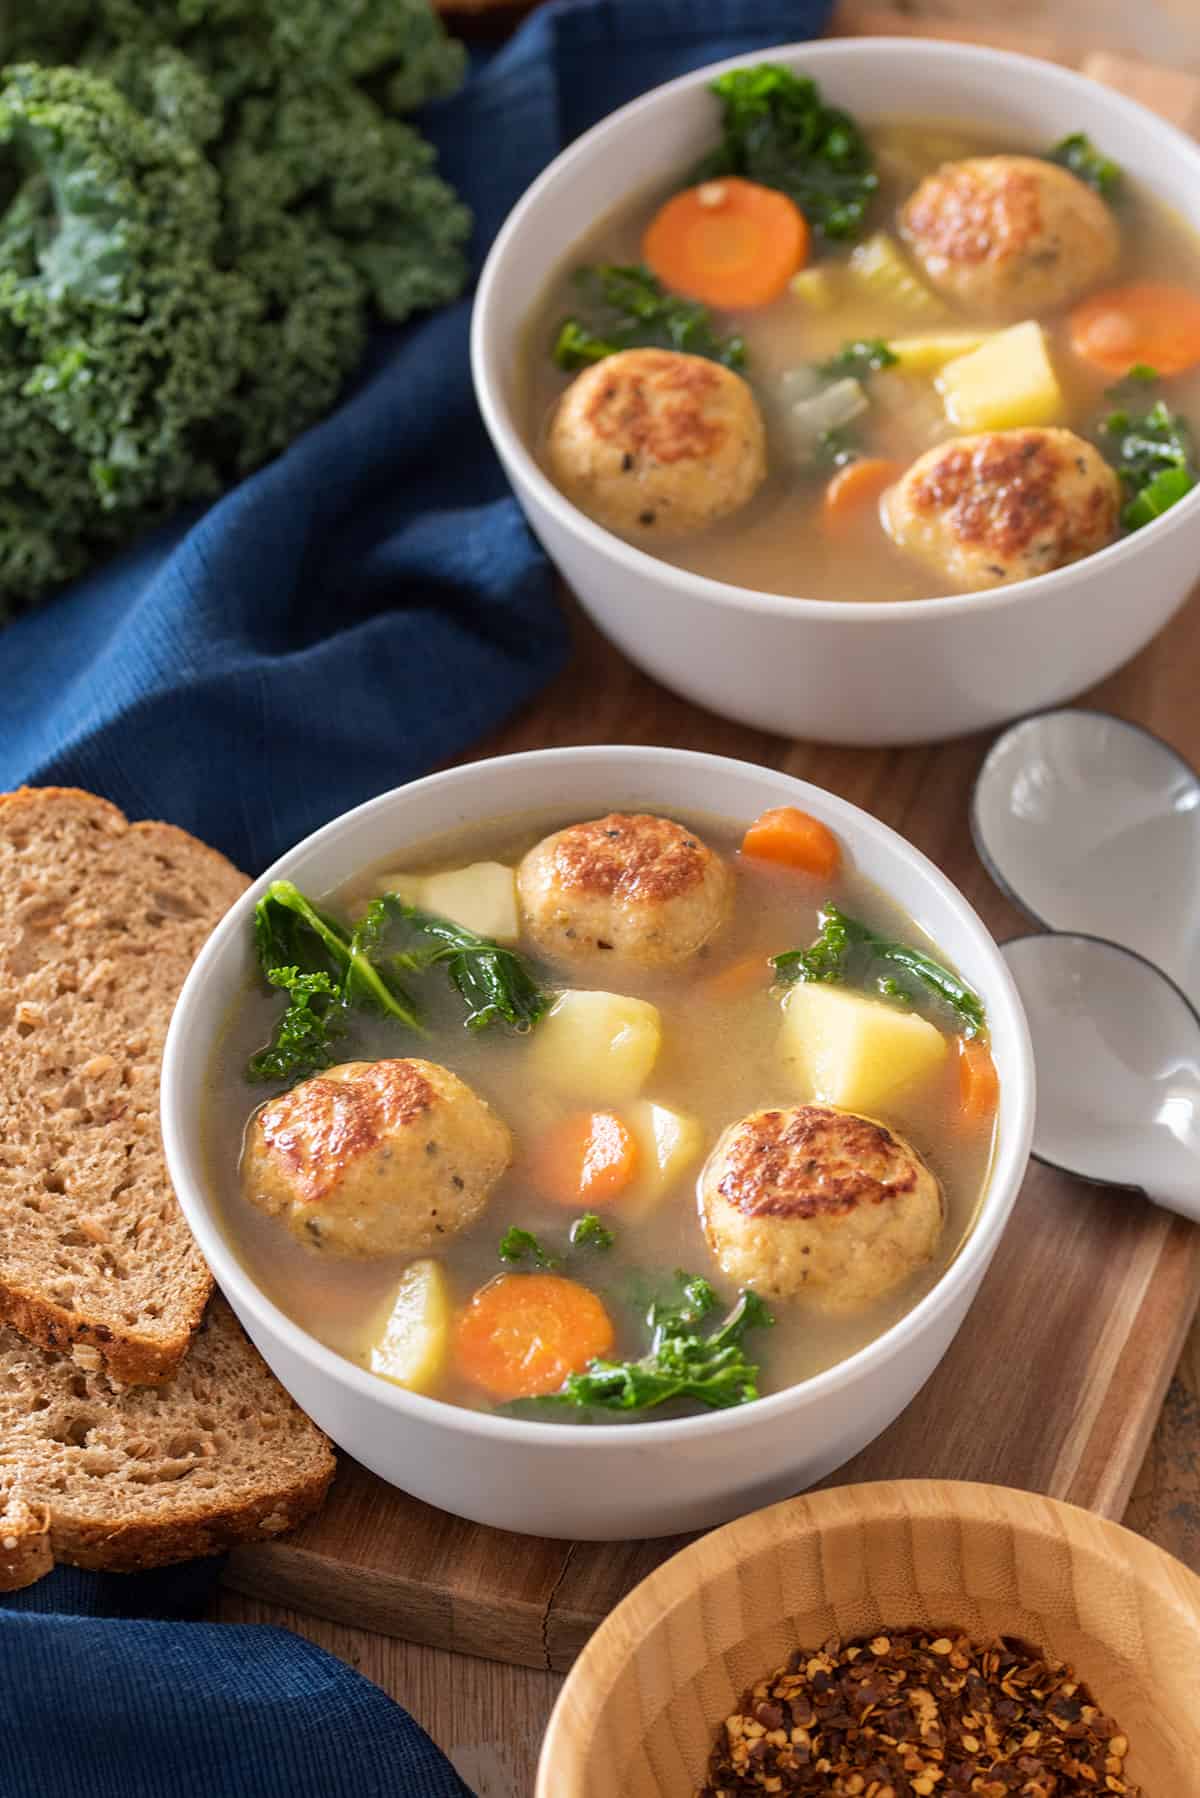 Two bowls of Chicken Meatball Soup with vegetables, carrots, and kale in a broth.